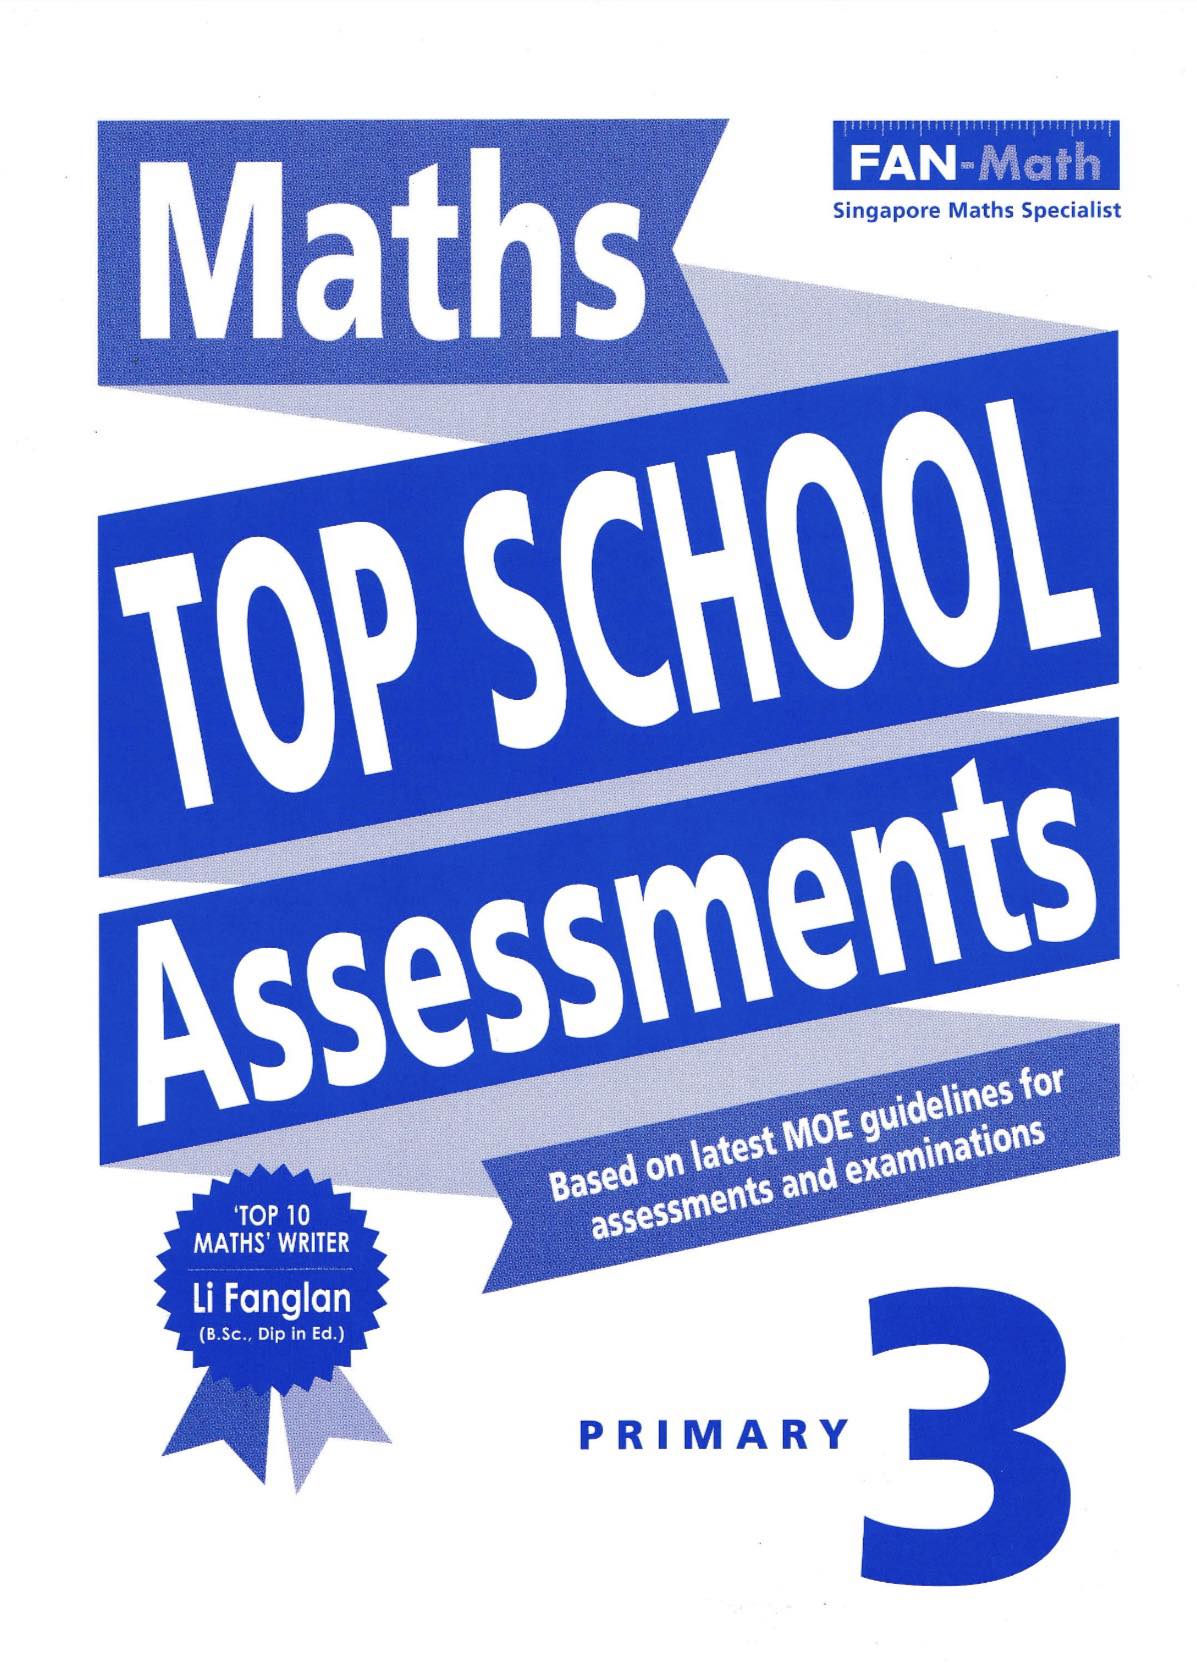 Maths Top School Assessments 2nd Edition for Primary Levels